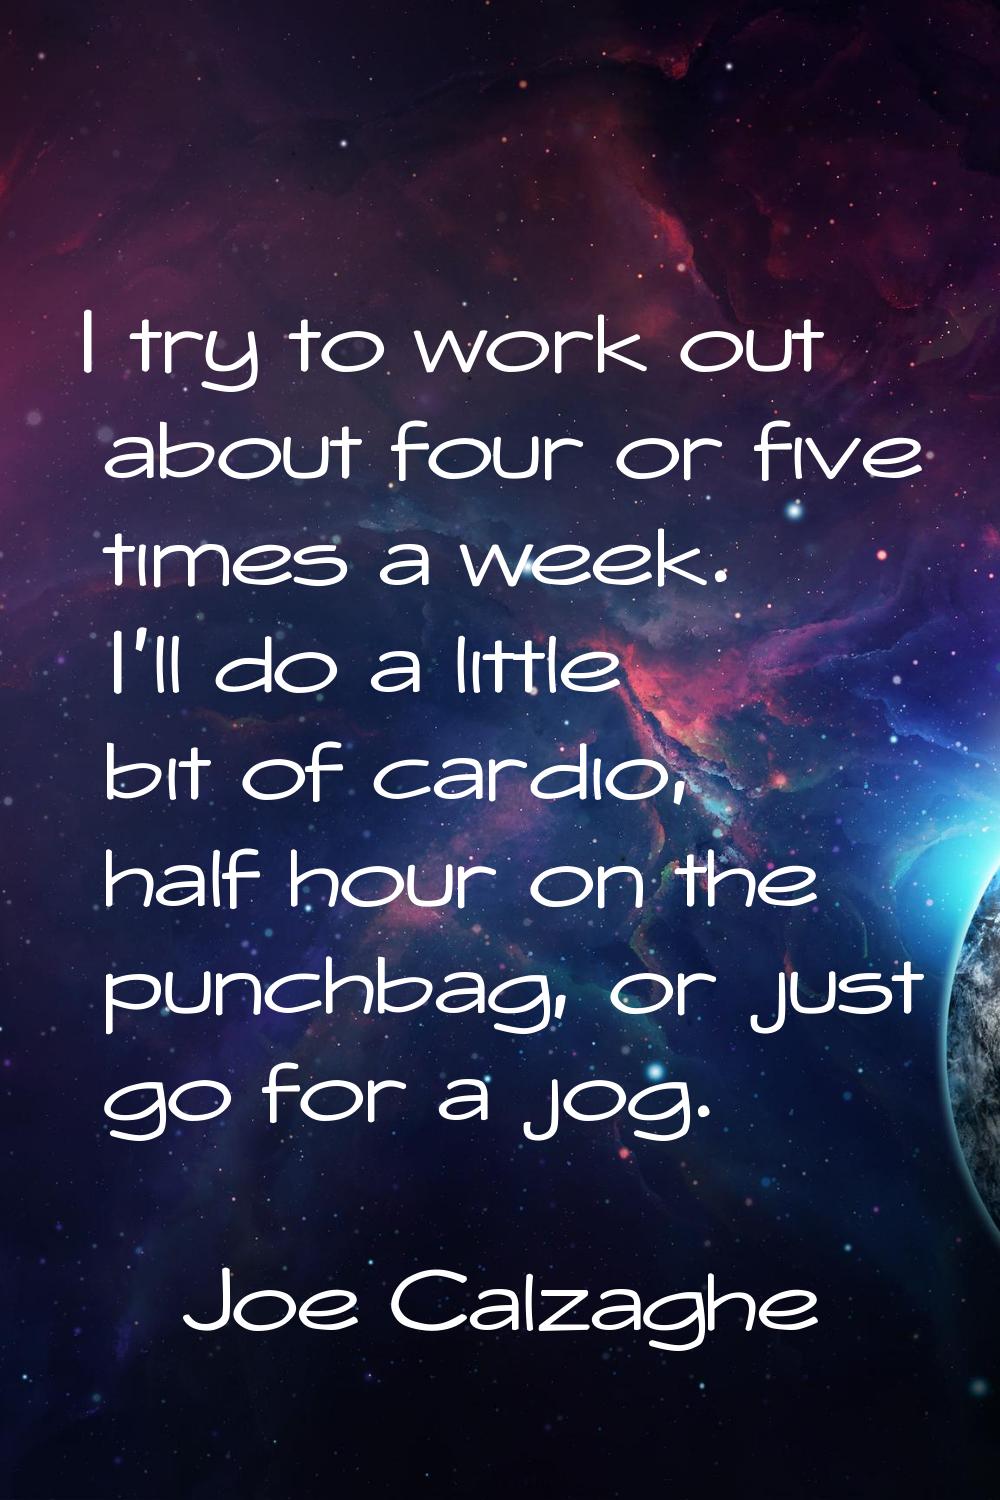 I try to work out about four or five times a week. I'll do a little bit of cardio, half hour on the